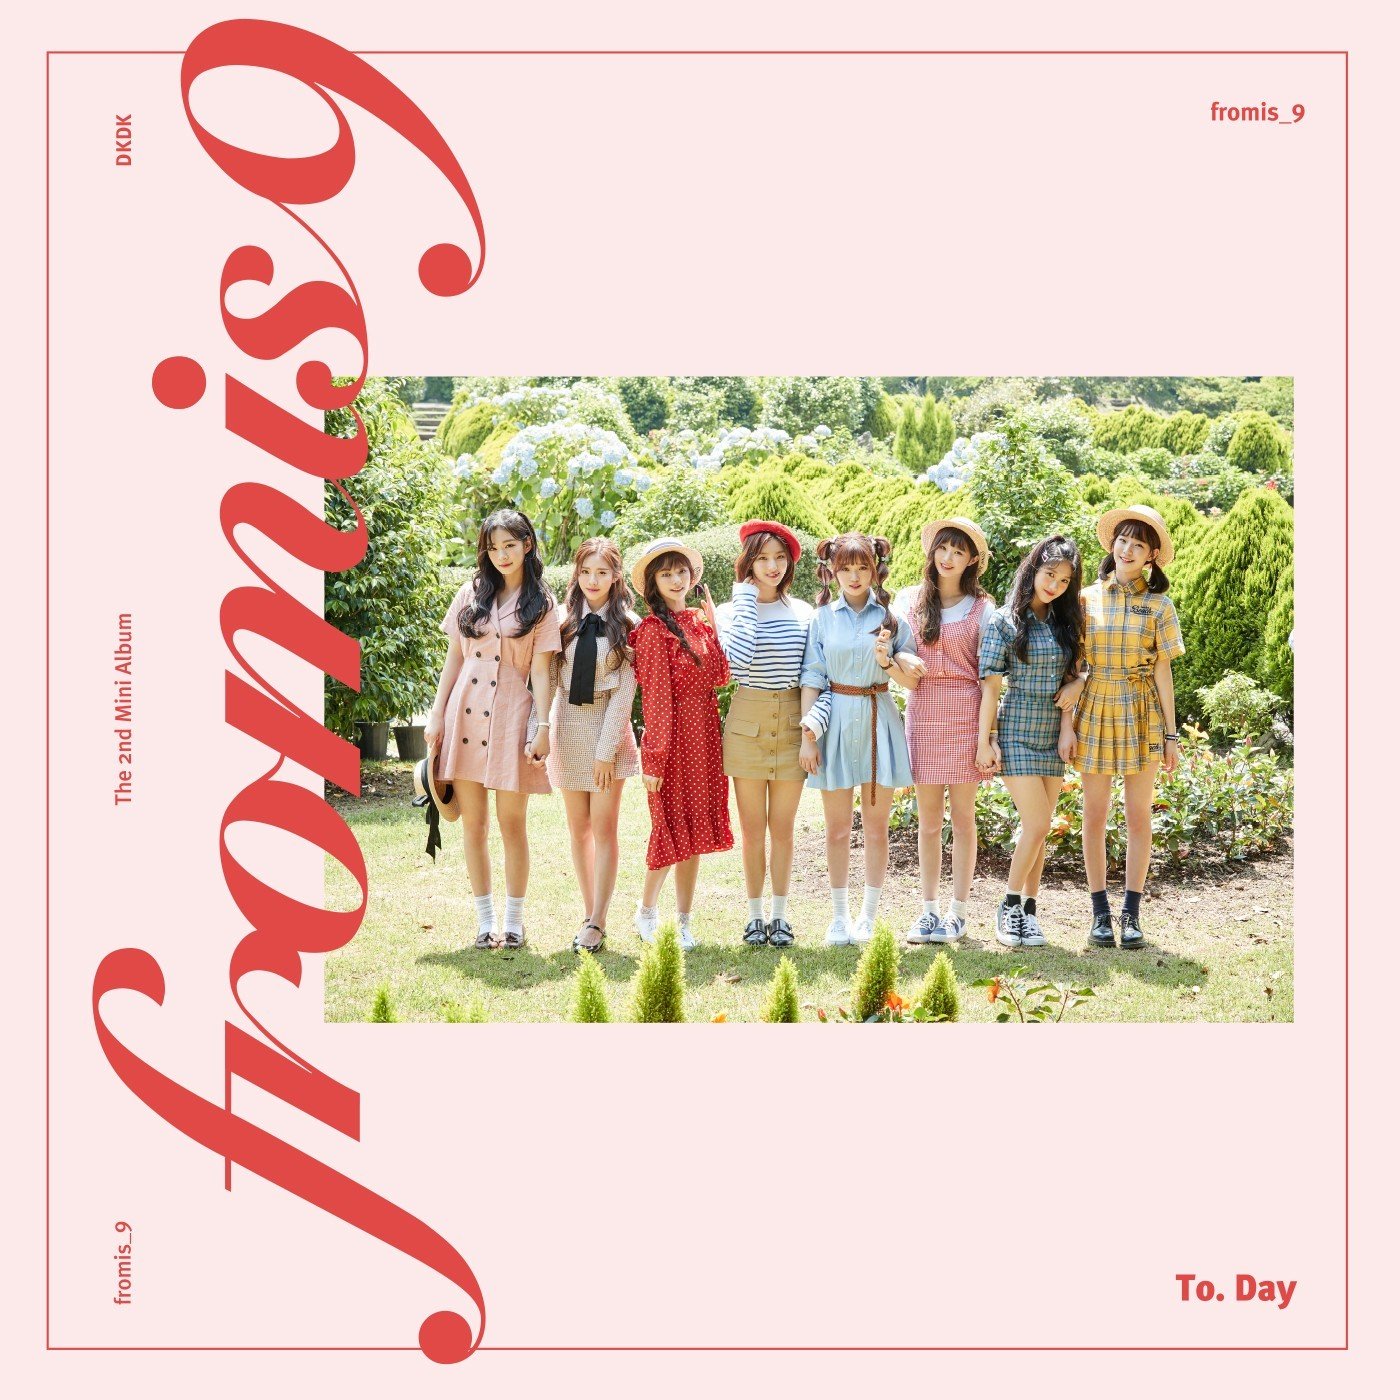 fromis_9 - To. Day [FLAC 24bit/96kHz]